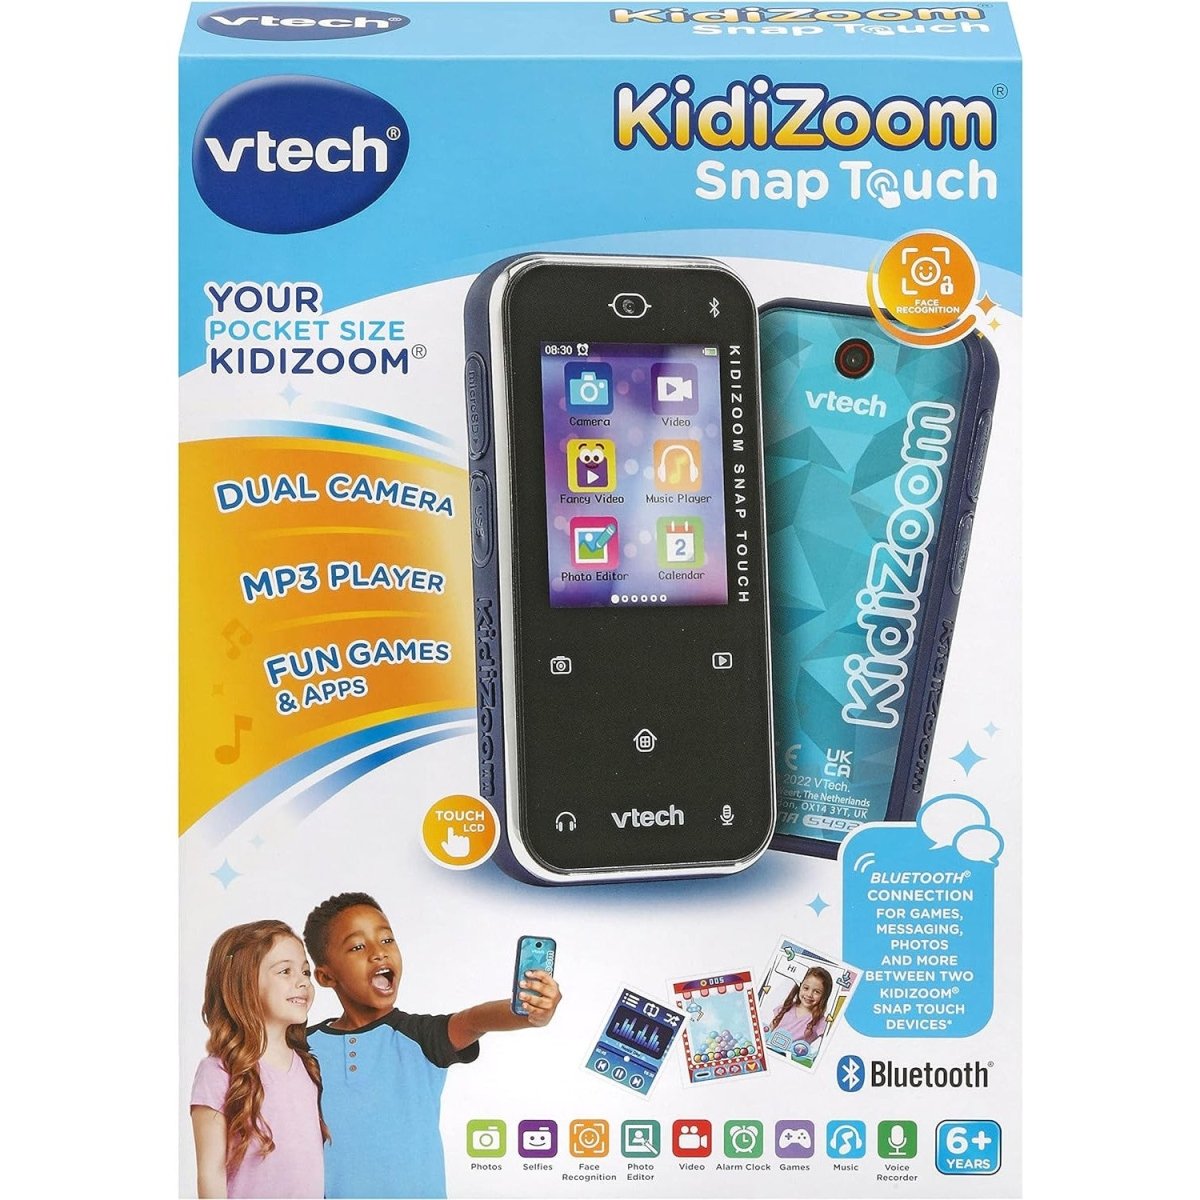 6x BROTECT Matte Screen Protector for Vtech Kidizoom Snap Touch